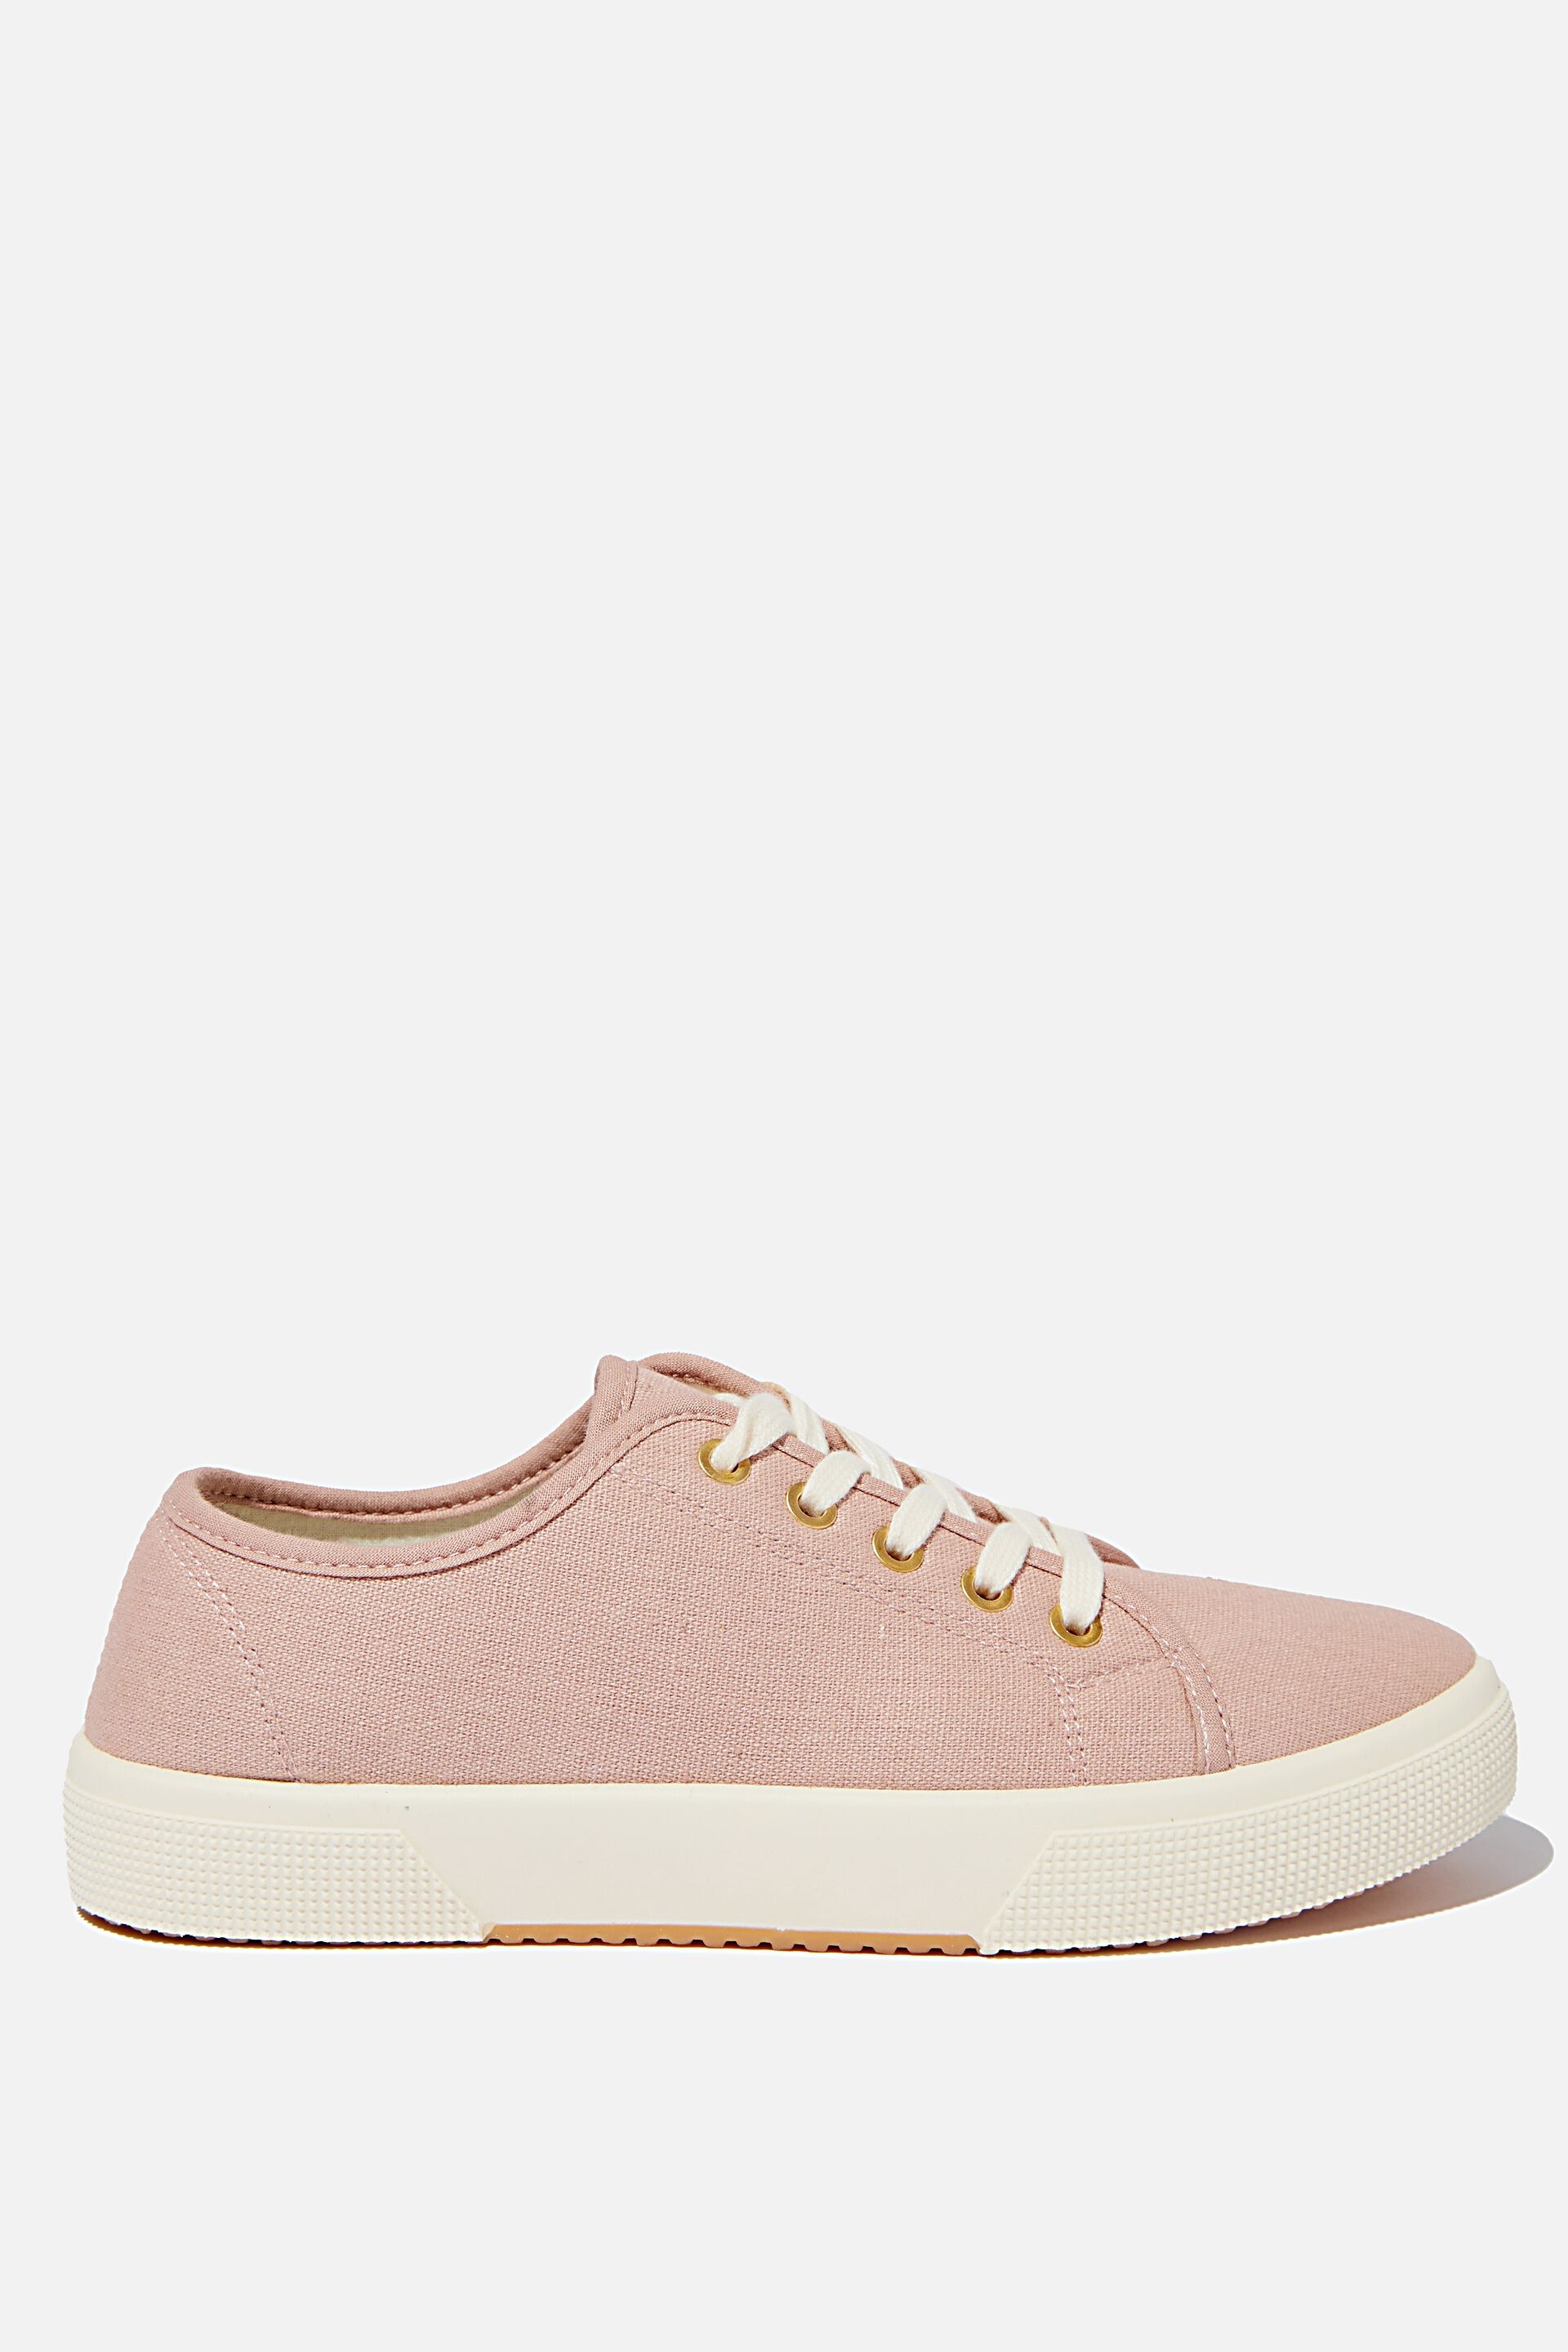 plimsolls with laces